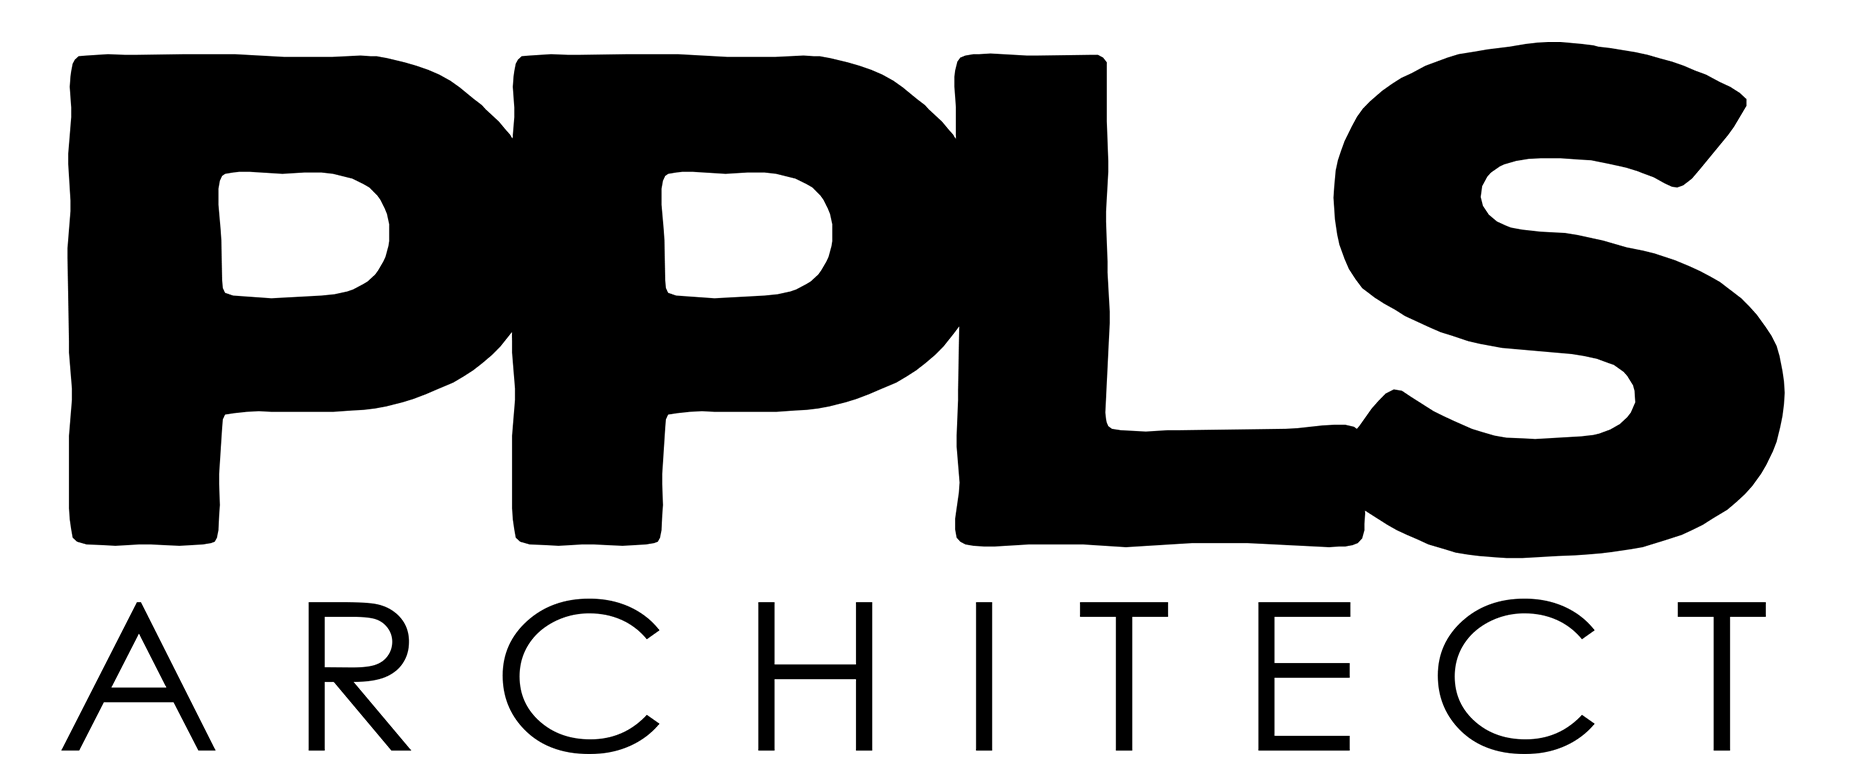 People's Architect Design Solutions - Logo